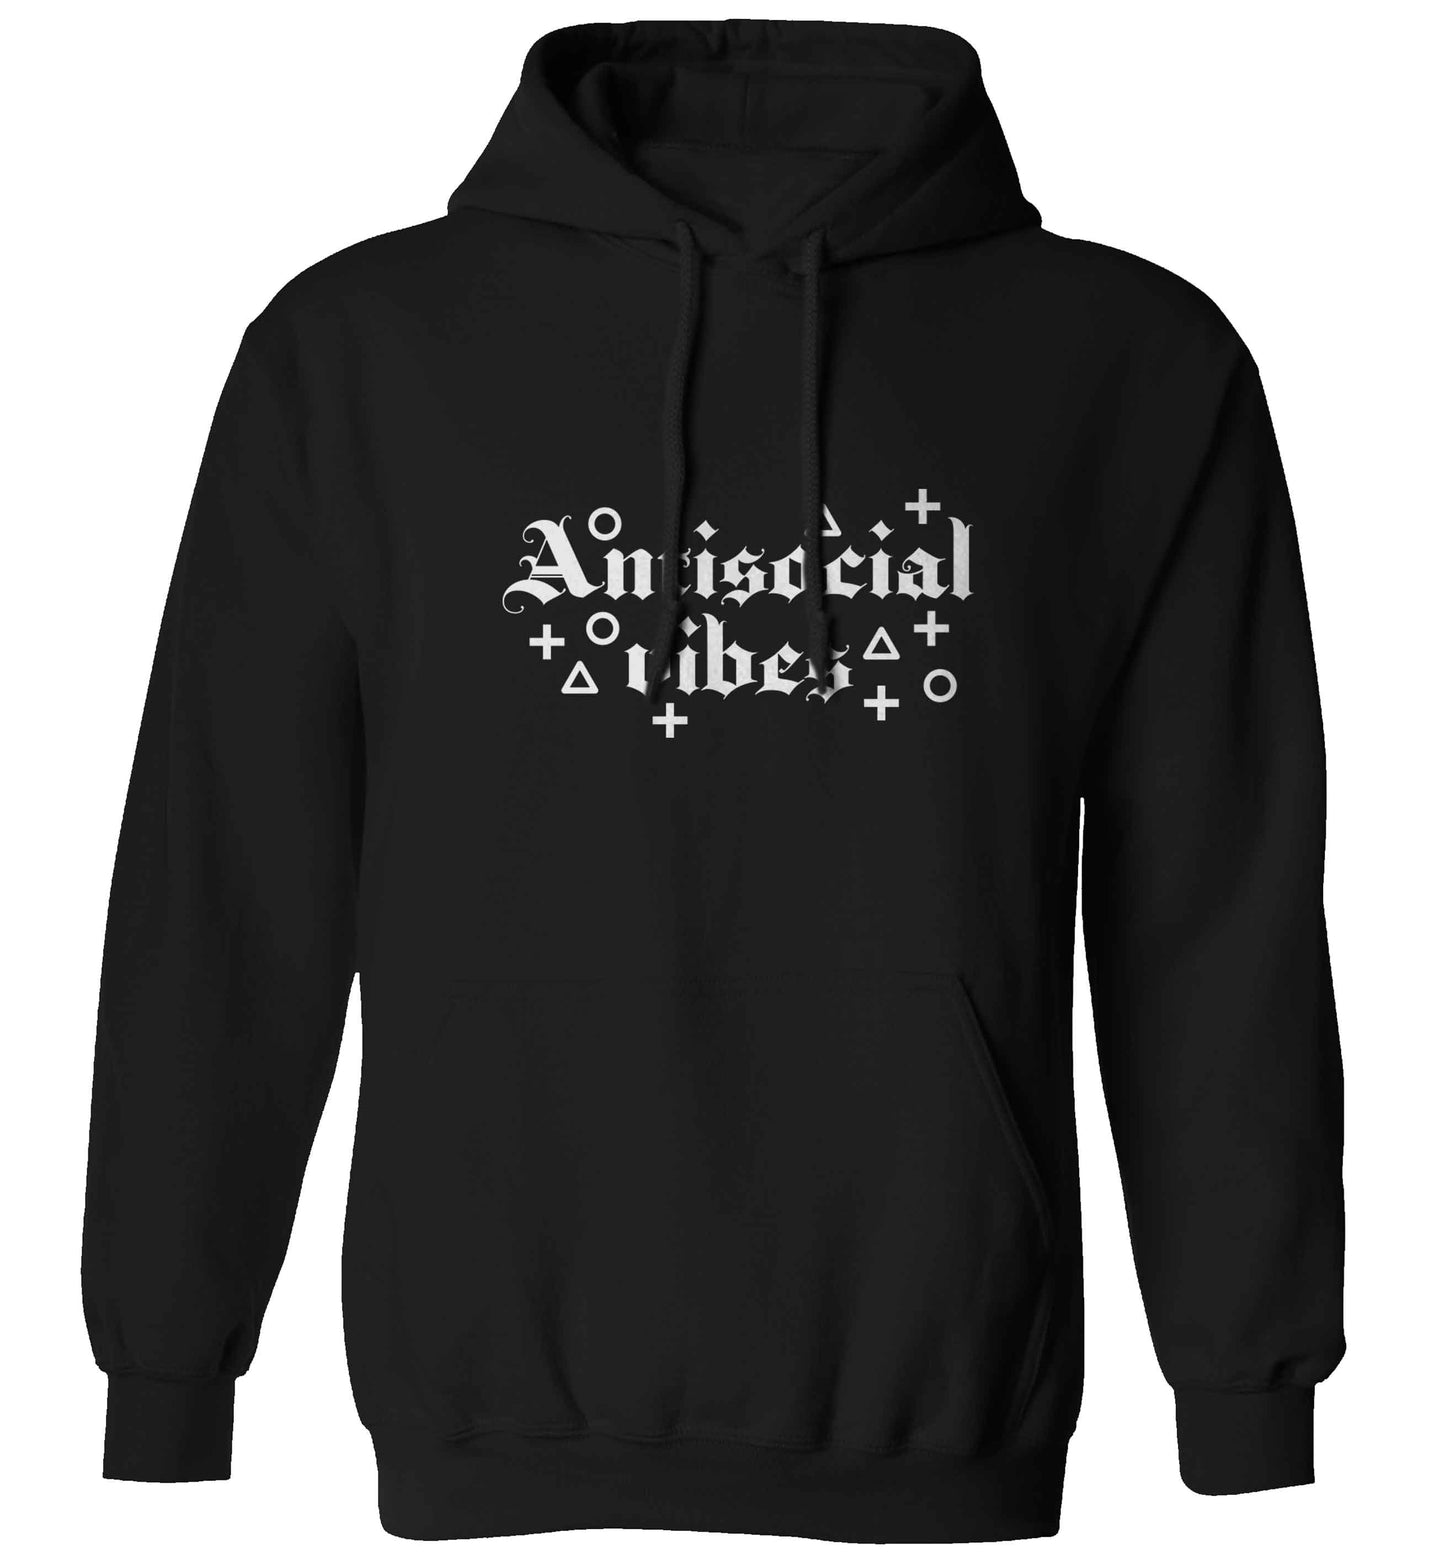 Antisocial vibes adults unisex black hoodie 2XL